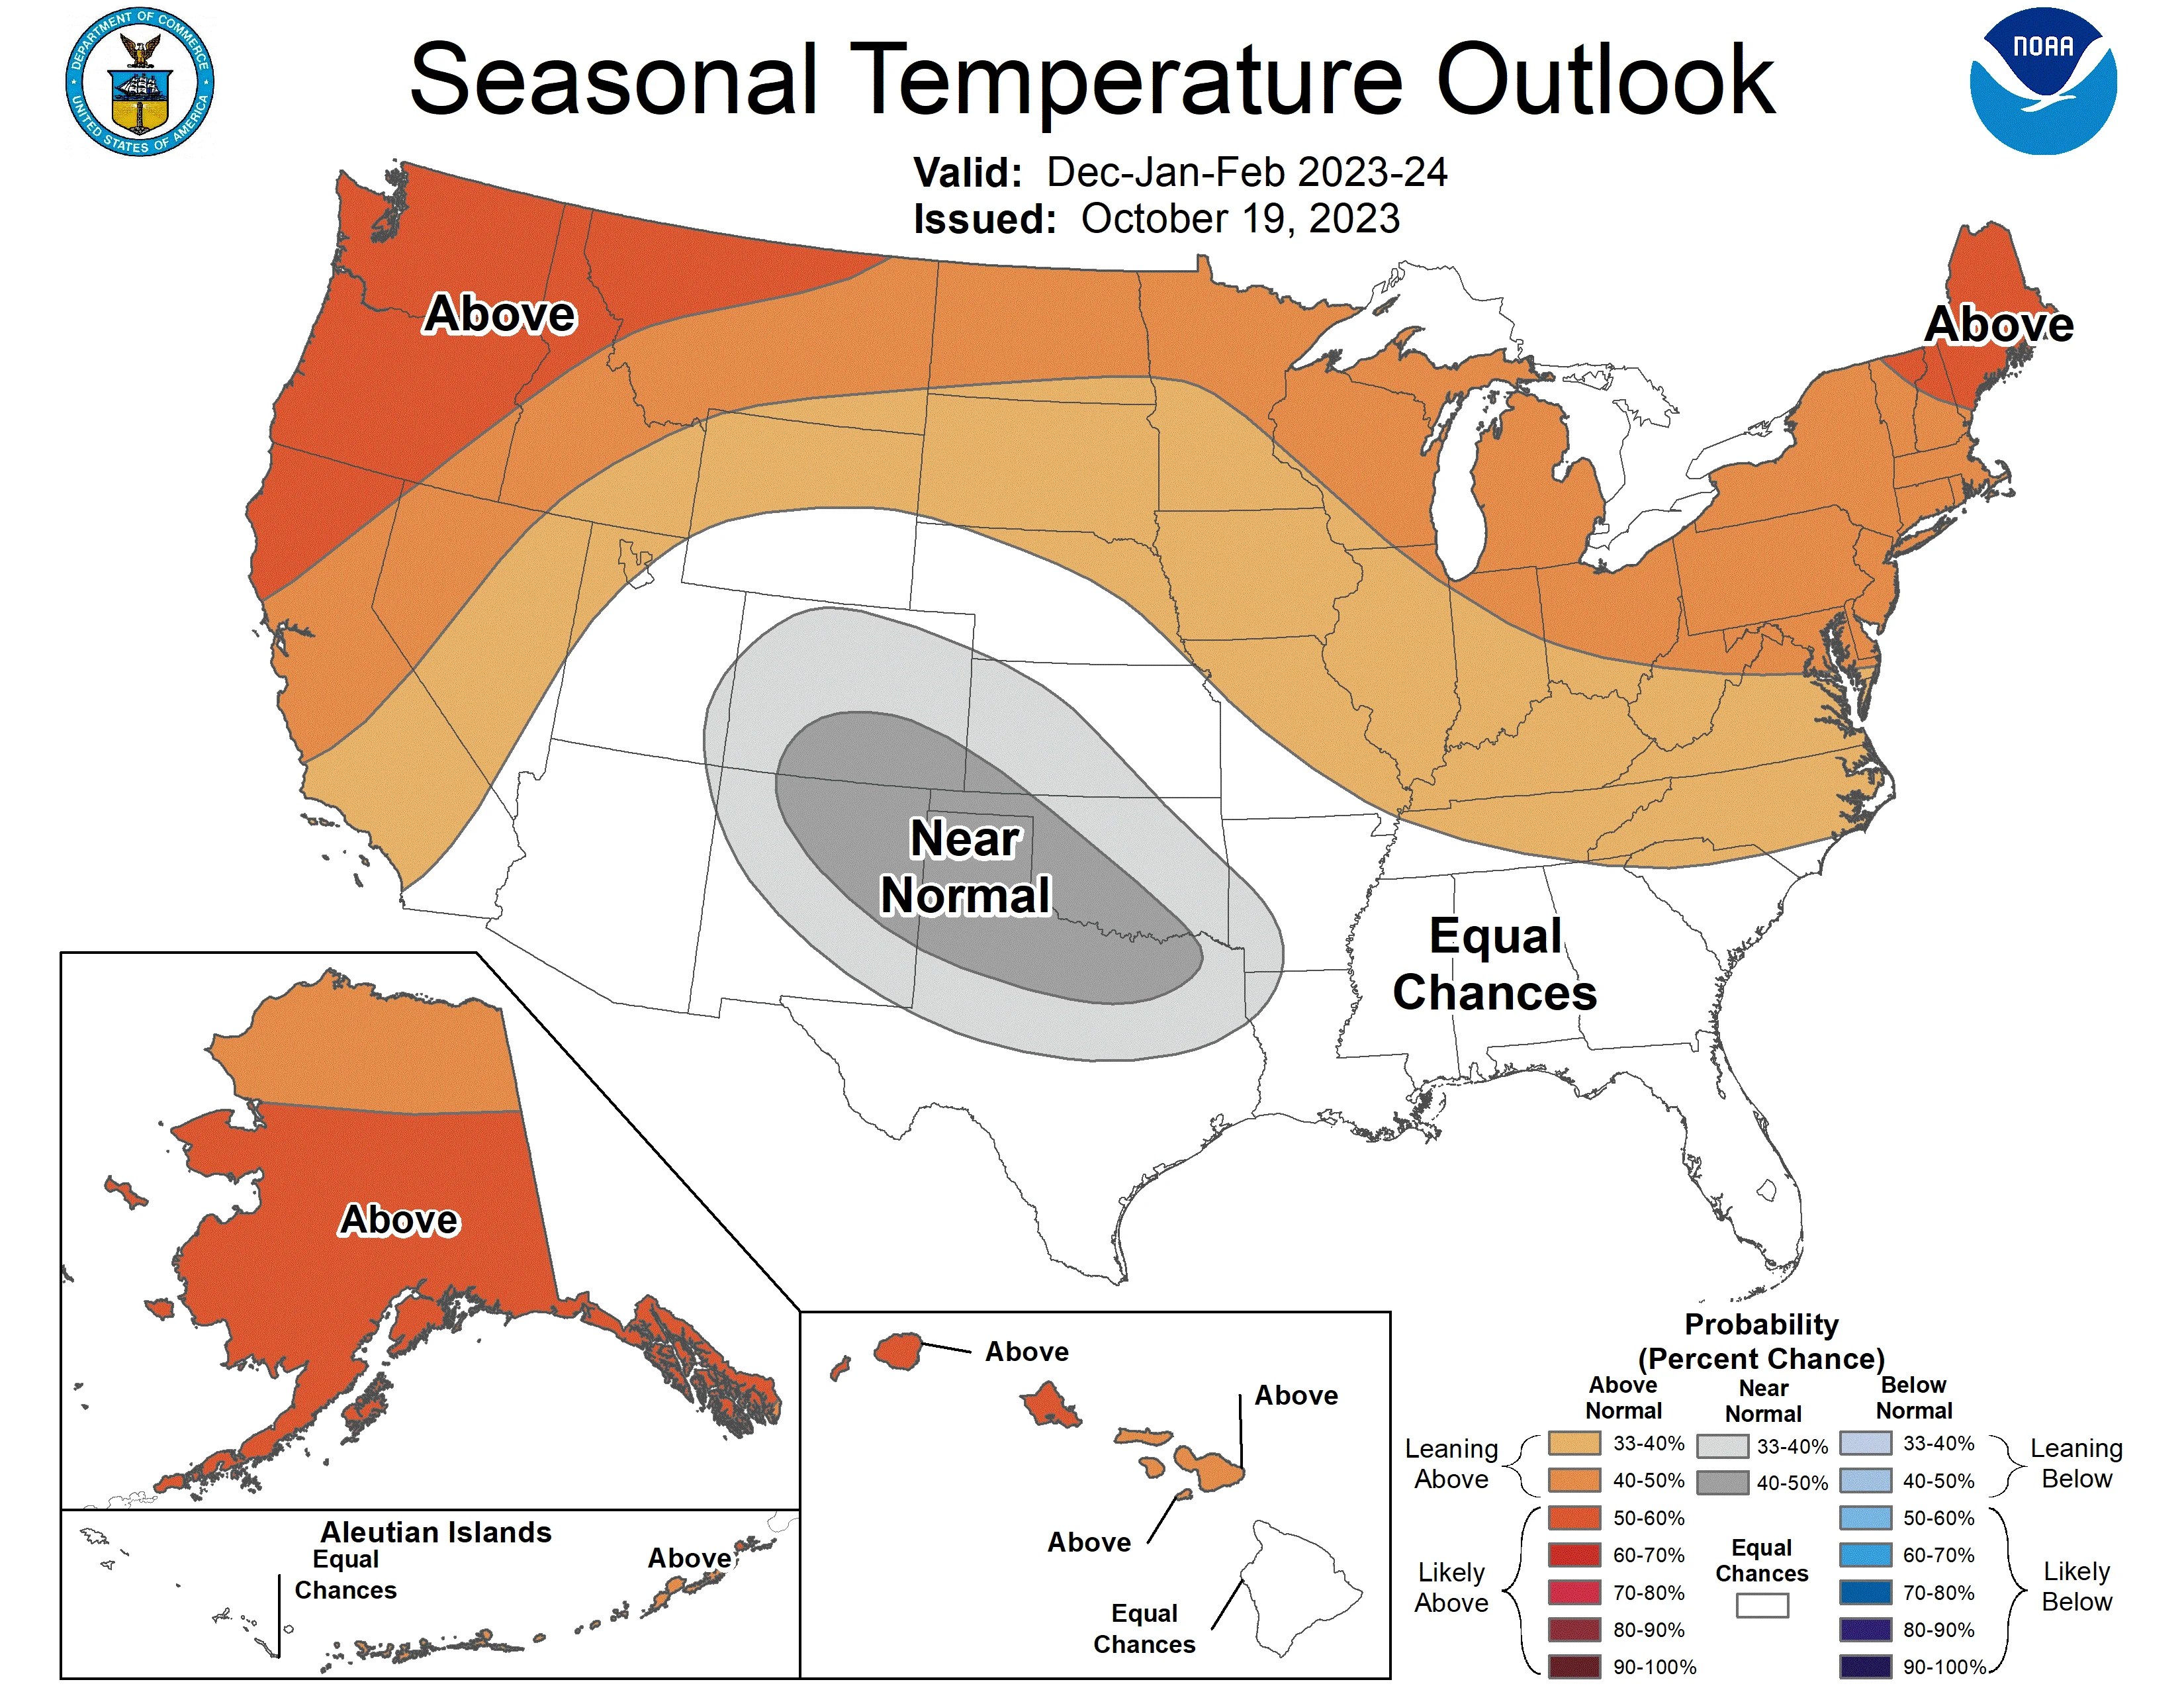 Winter 2021-2022 Outlook for Texas